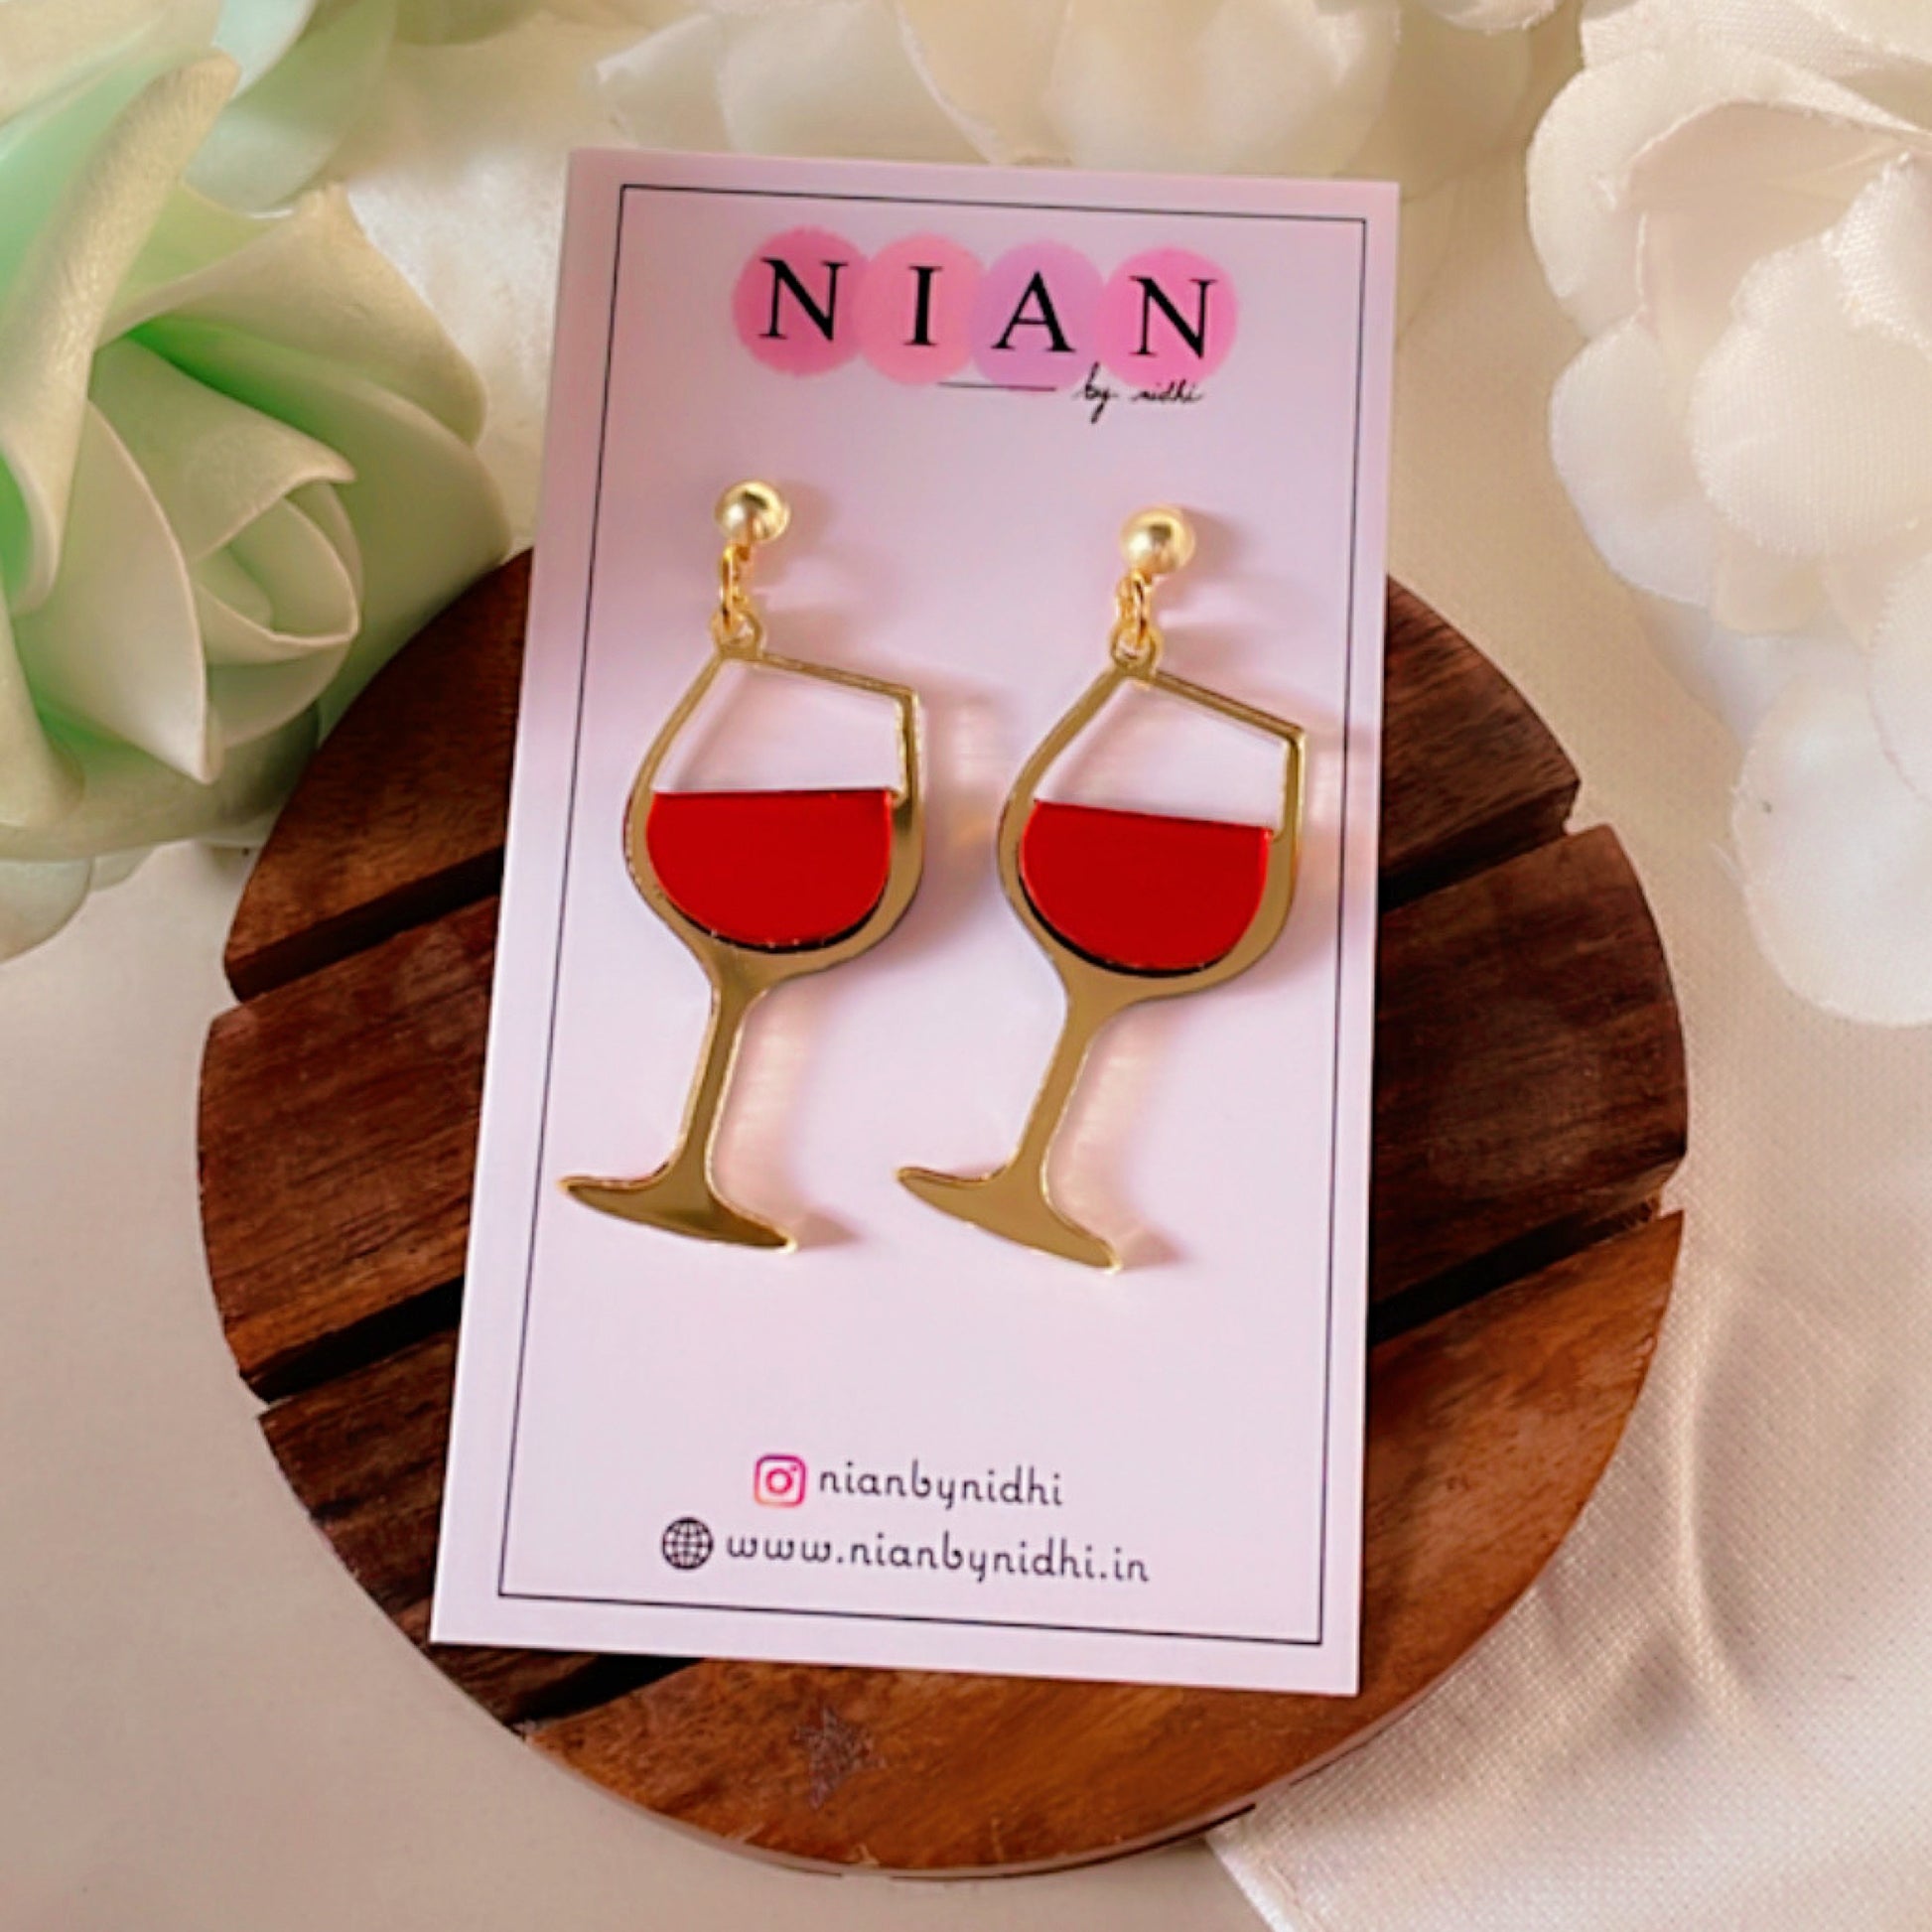 Wine Goblet Earrings - Glossy Red and Golden - Nian by Nidhi - placed in a white flowery background